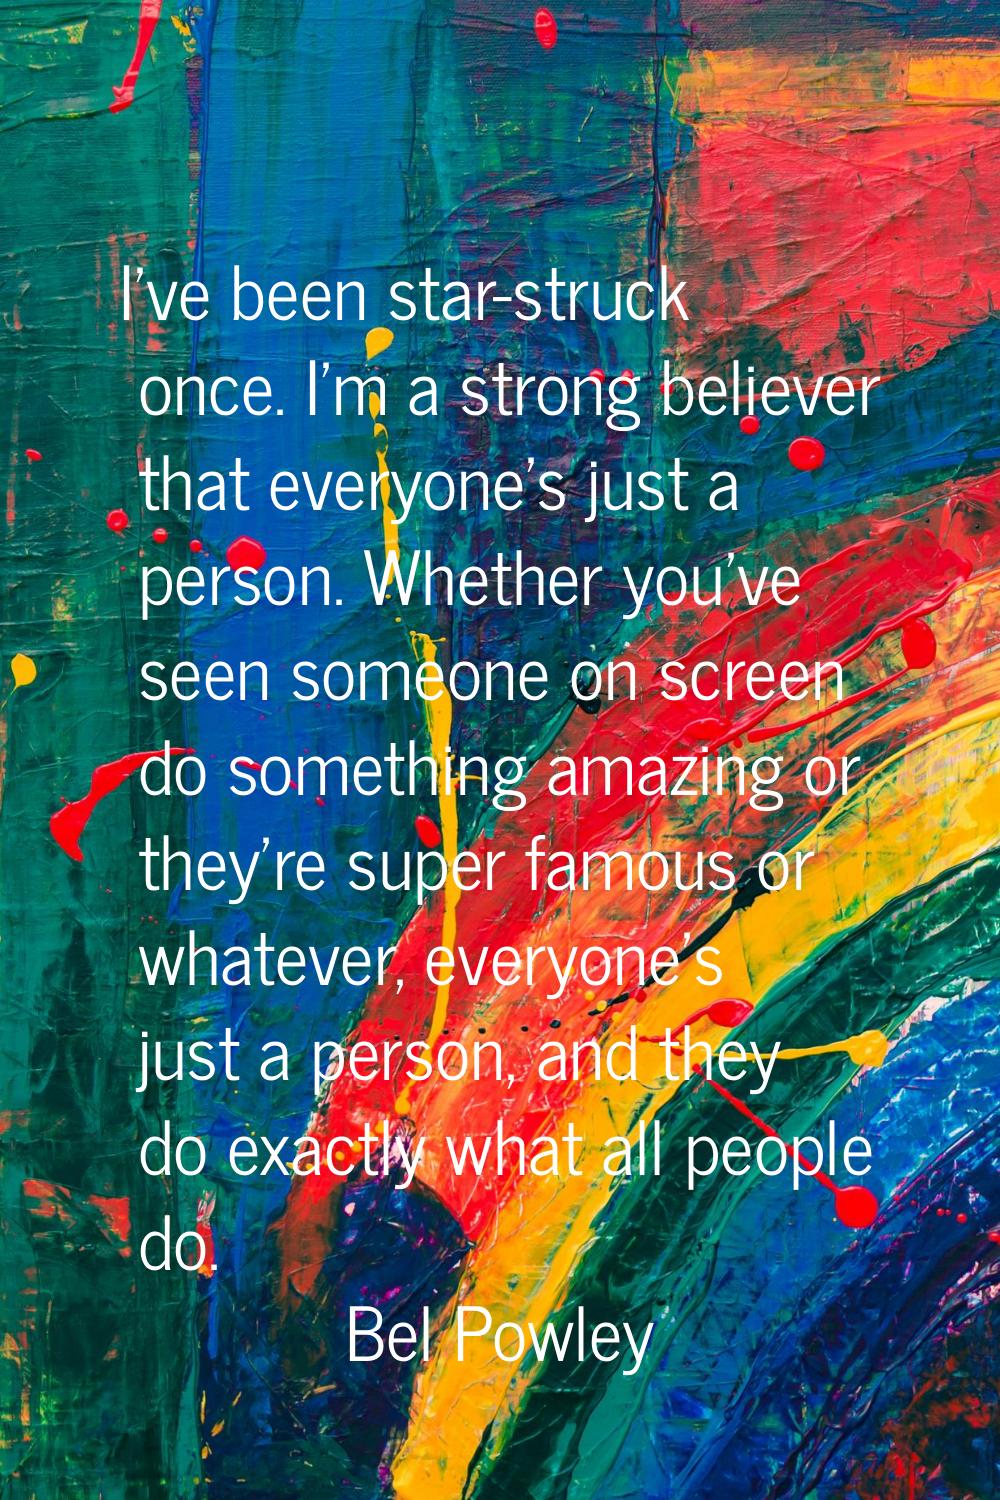 I've been star-struck once. I'm a strong believer that everyone's just a person. Whether you've see